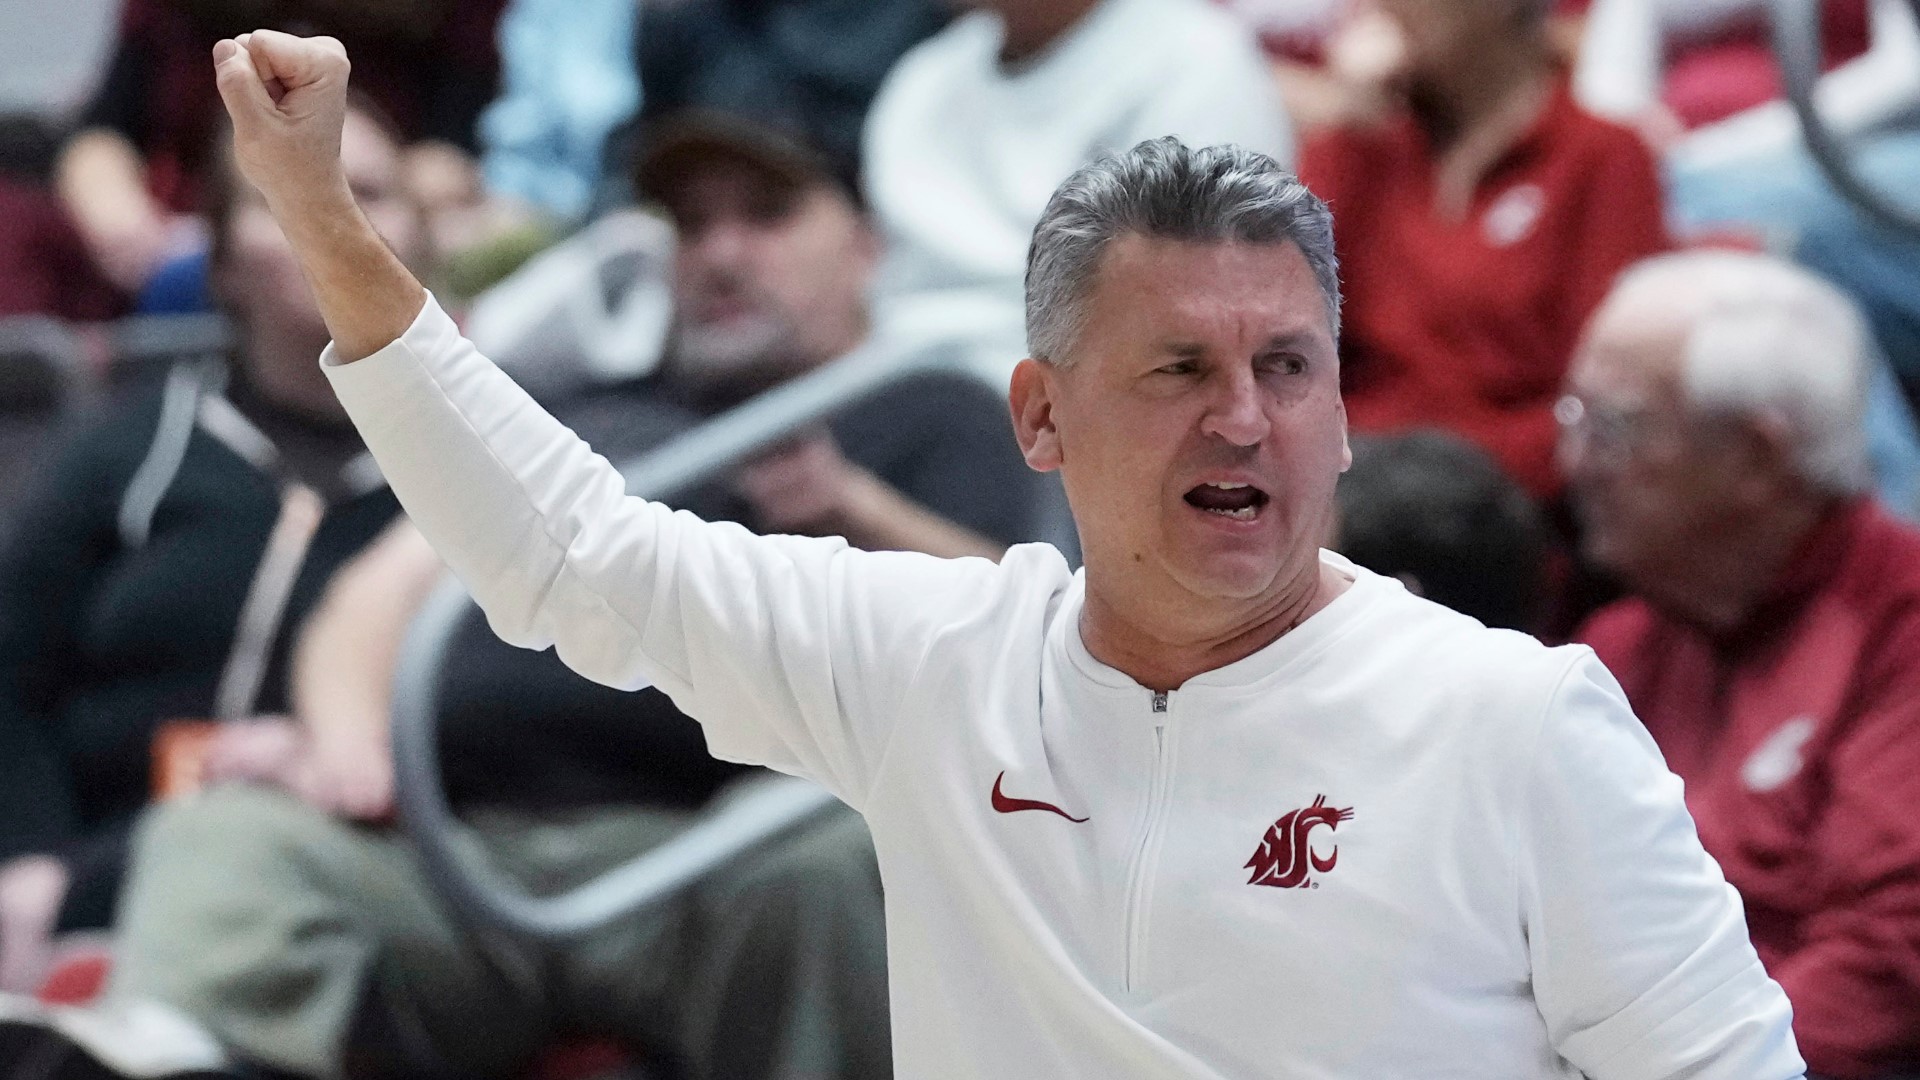 Washington State University head basketball coach Kyle Smith is reportedly taking a job at Stanford. The news comes after Smith led WSU to the NCAA Tournament.